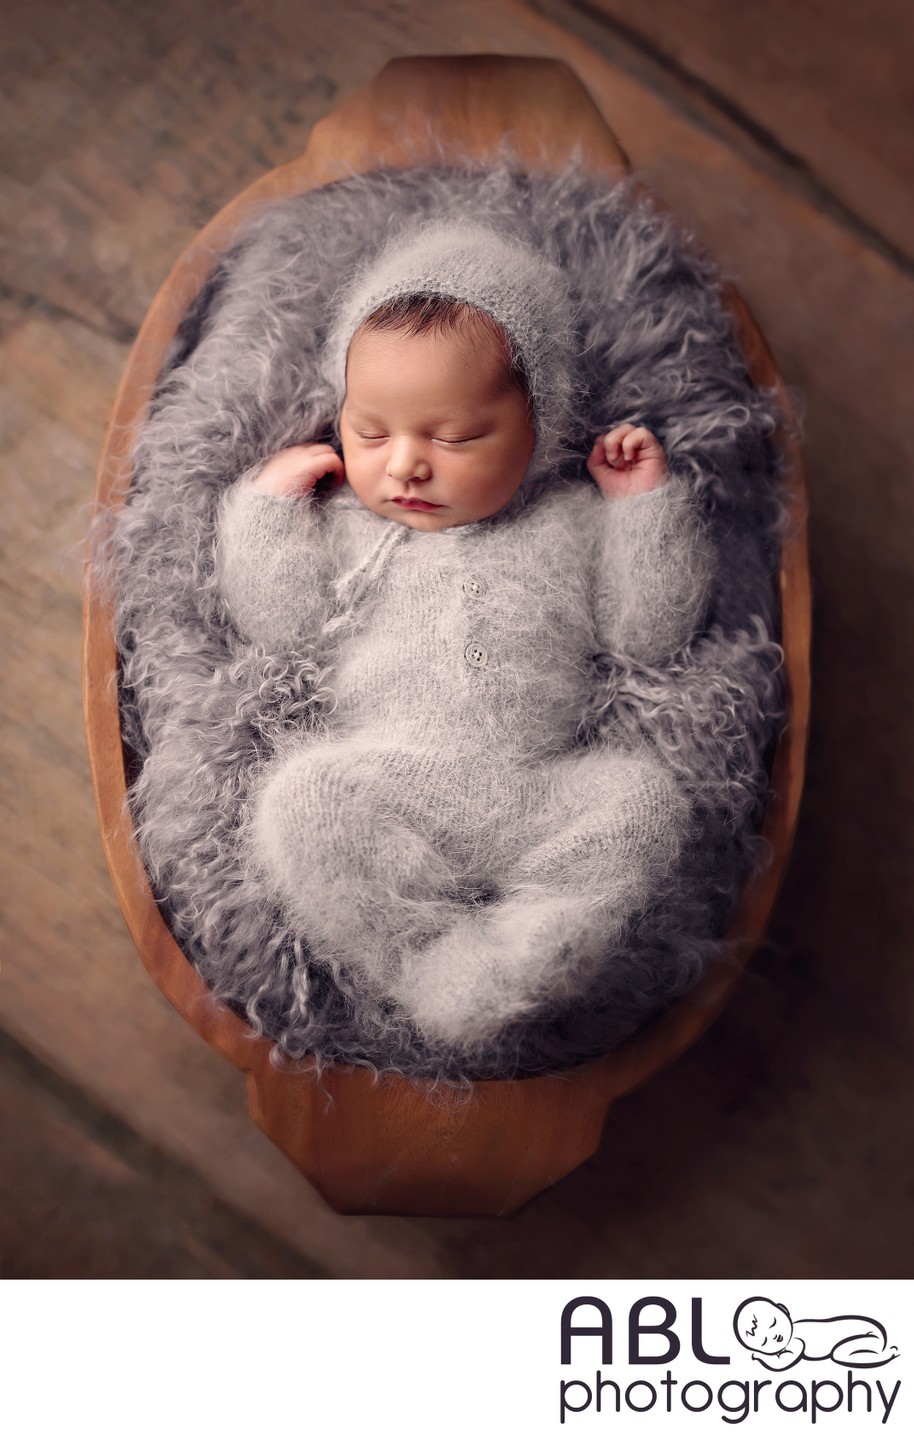 Baby in gray fluffy outfit